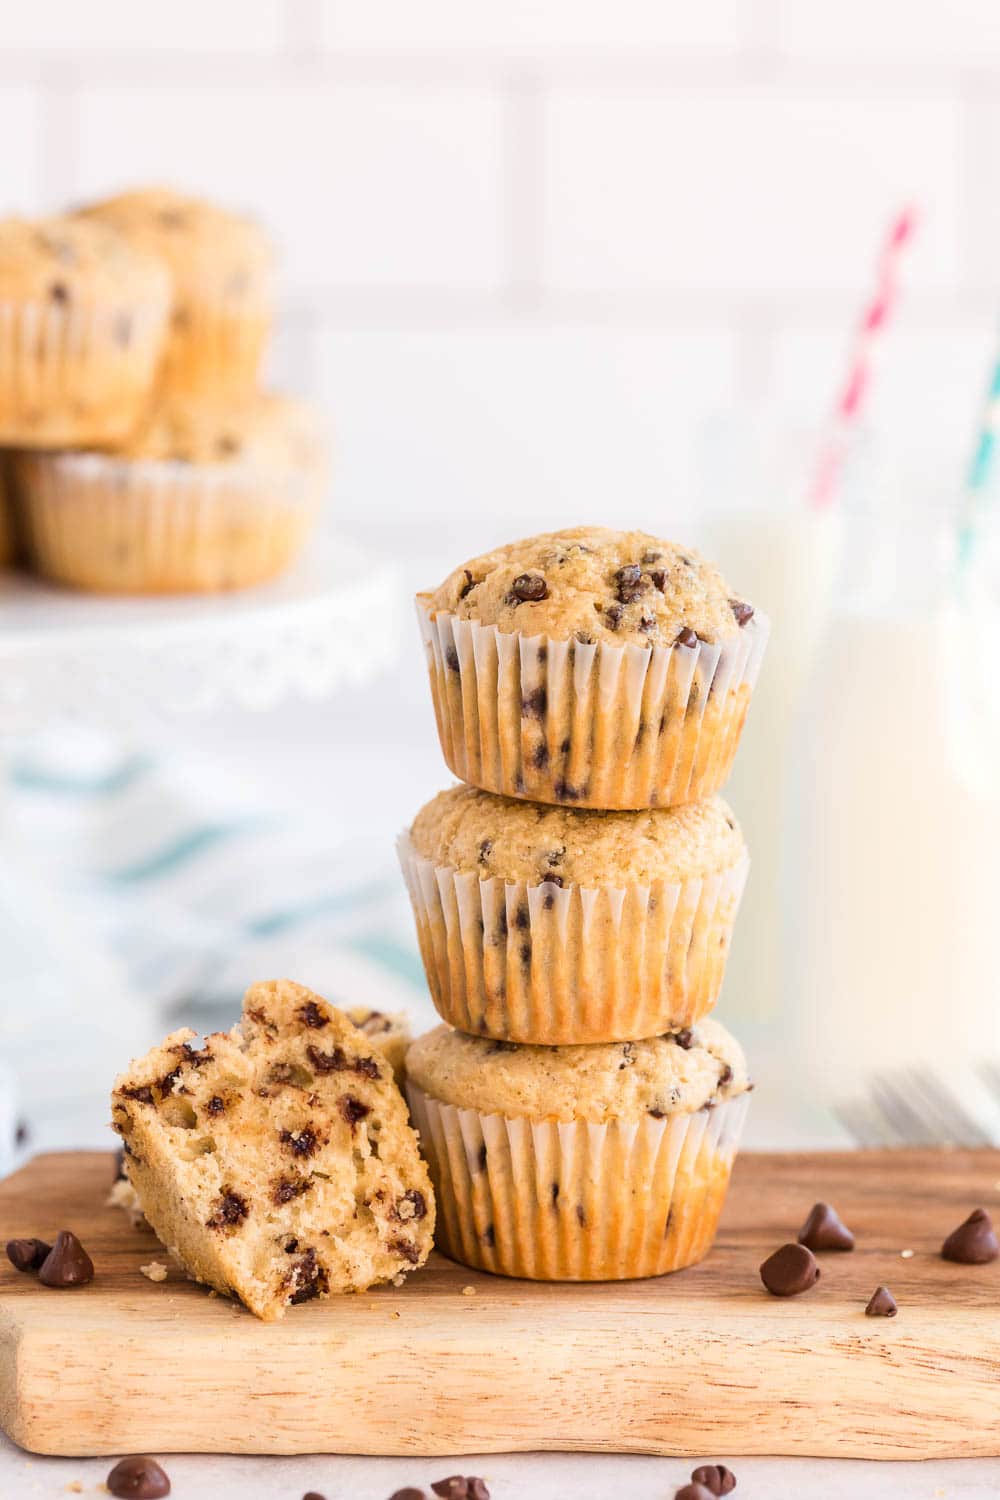 These Chocolate Chip muffins are soft, chocolatey and delicious! They are perfect as a breakfast muffin served with a glass of milk and some scrambled eggs.   